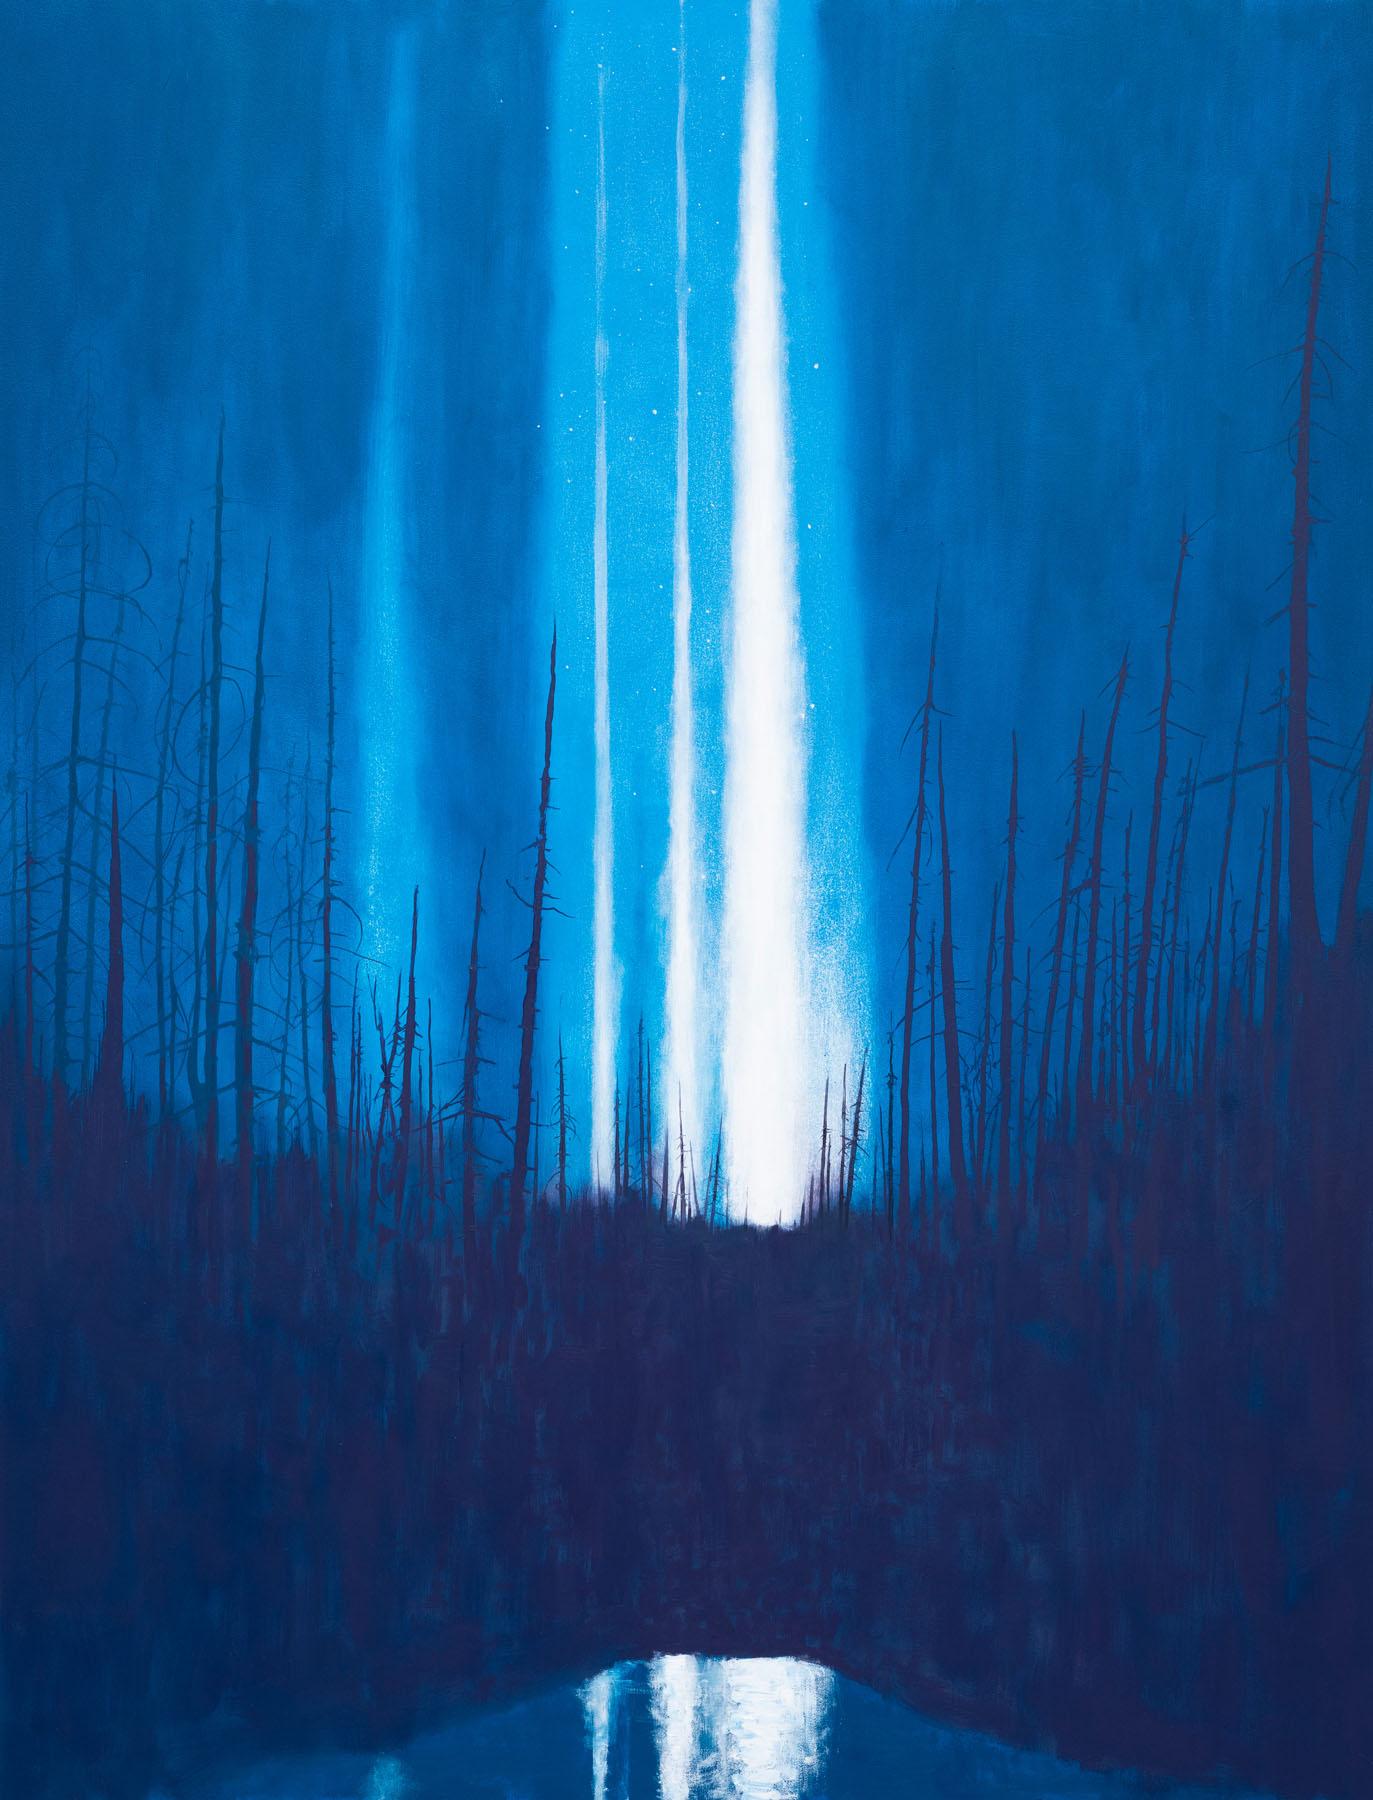 Jim Denney Landscape Painting - Reflections (Sky Watcher), blue landscape painting of trees and forest